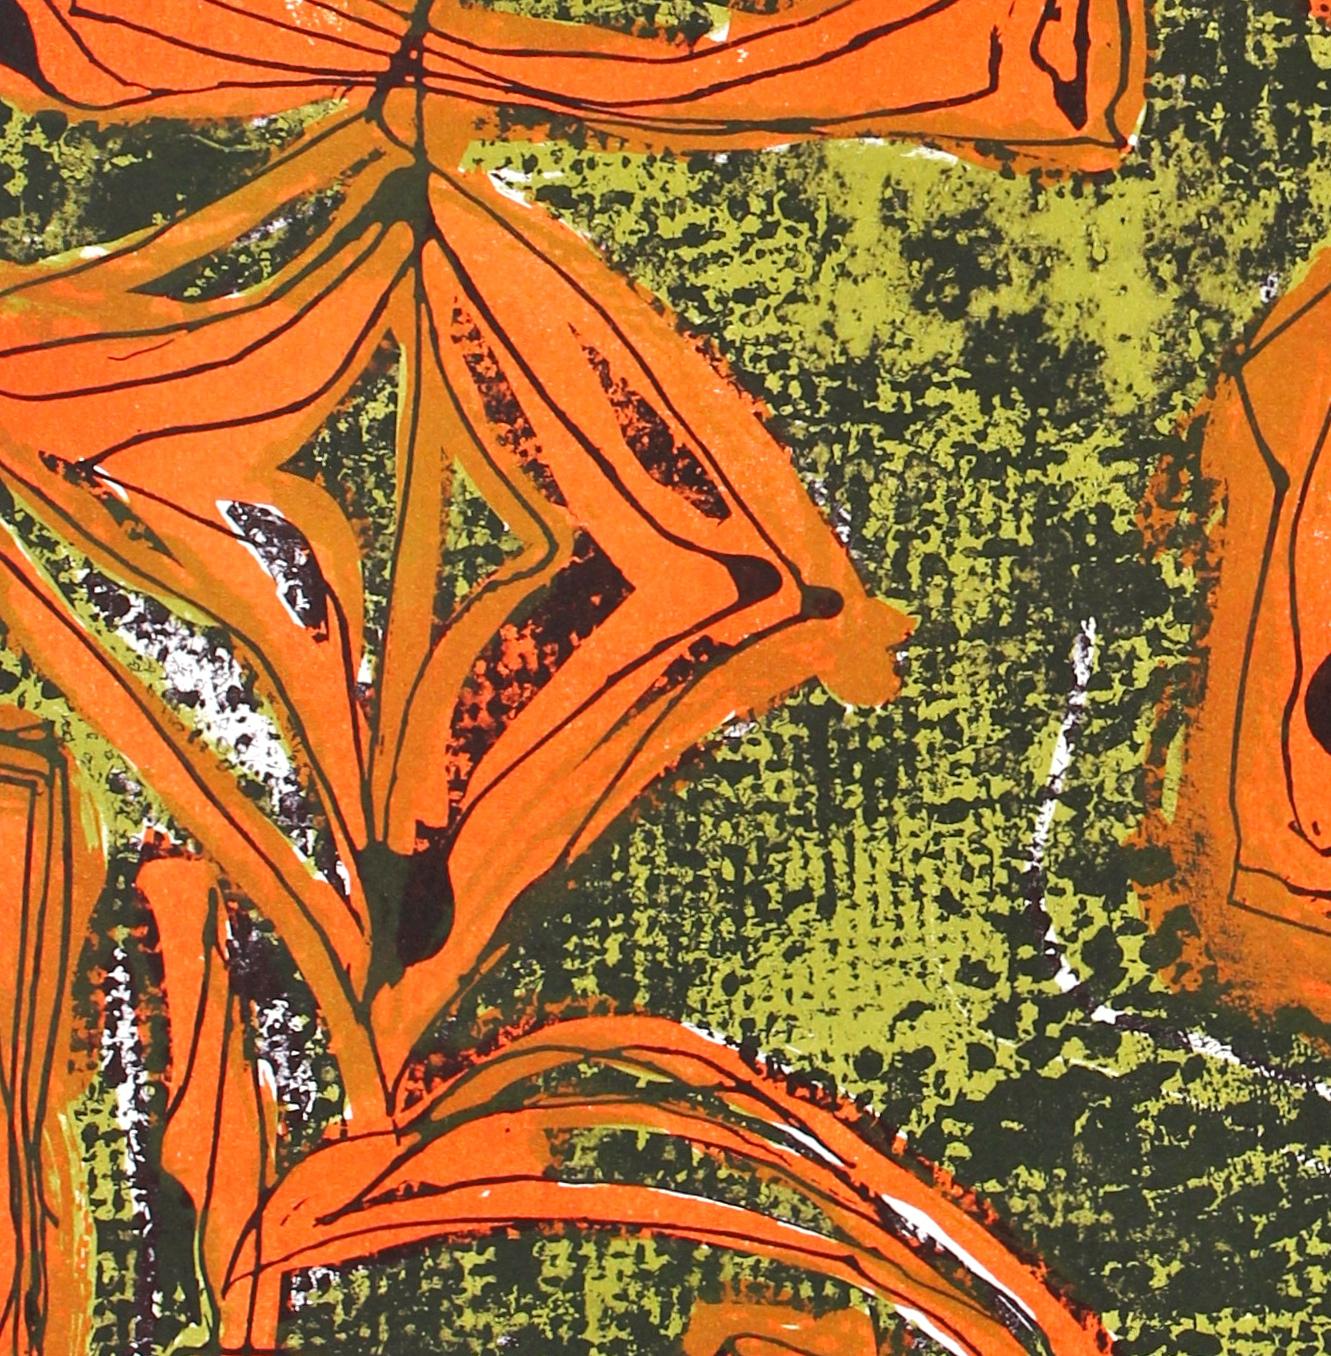 Modernist Abstract Lithograph in Orange and Green, Circa 1950s - American Modern Print by Jerry Opper